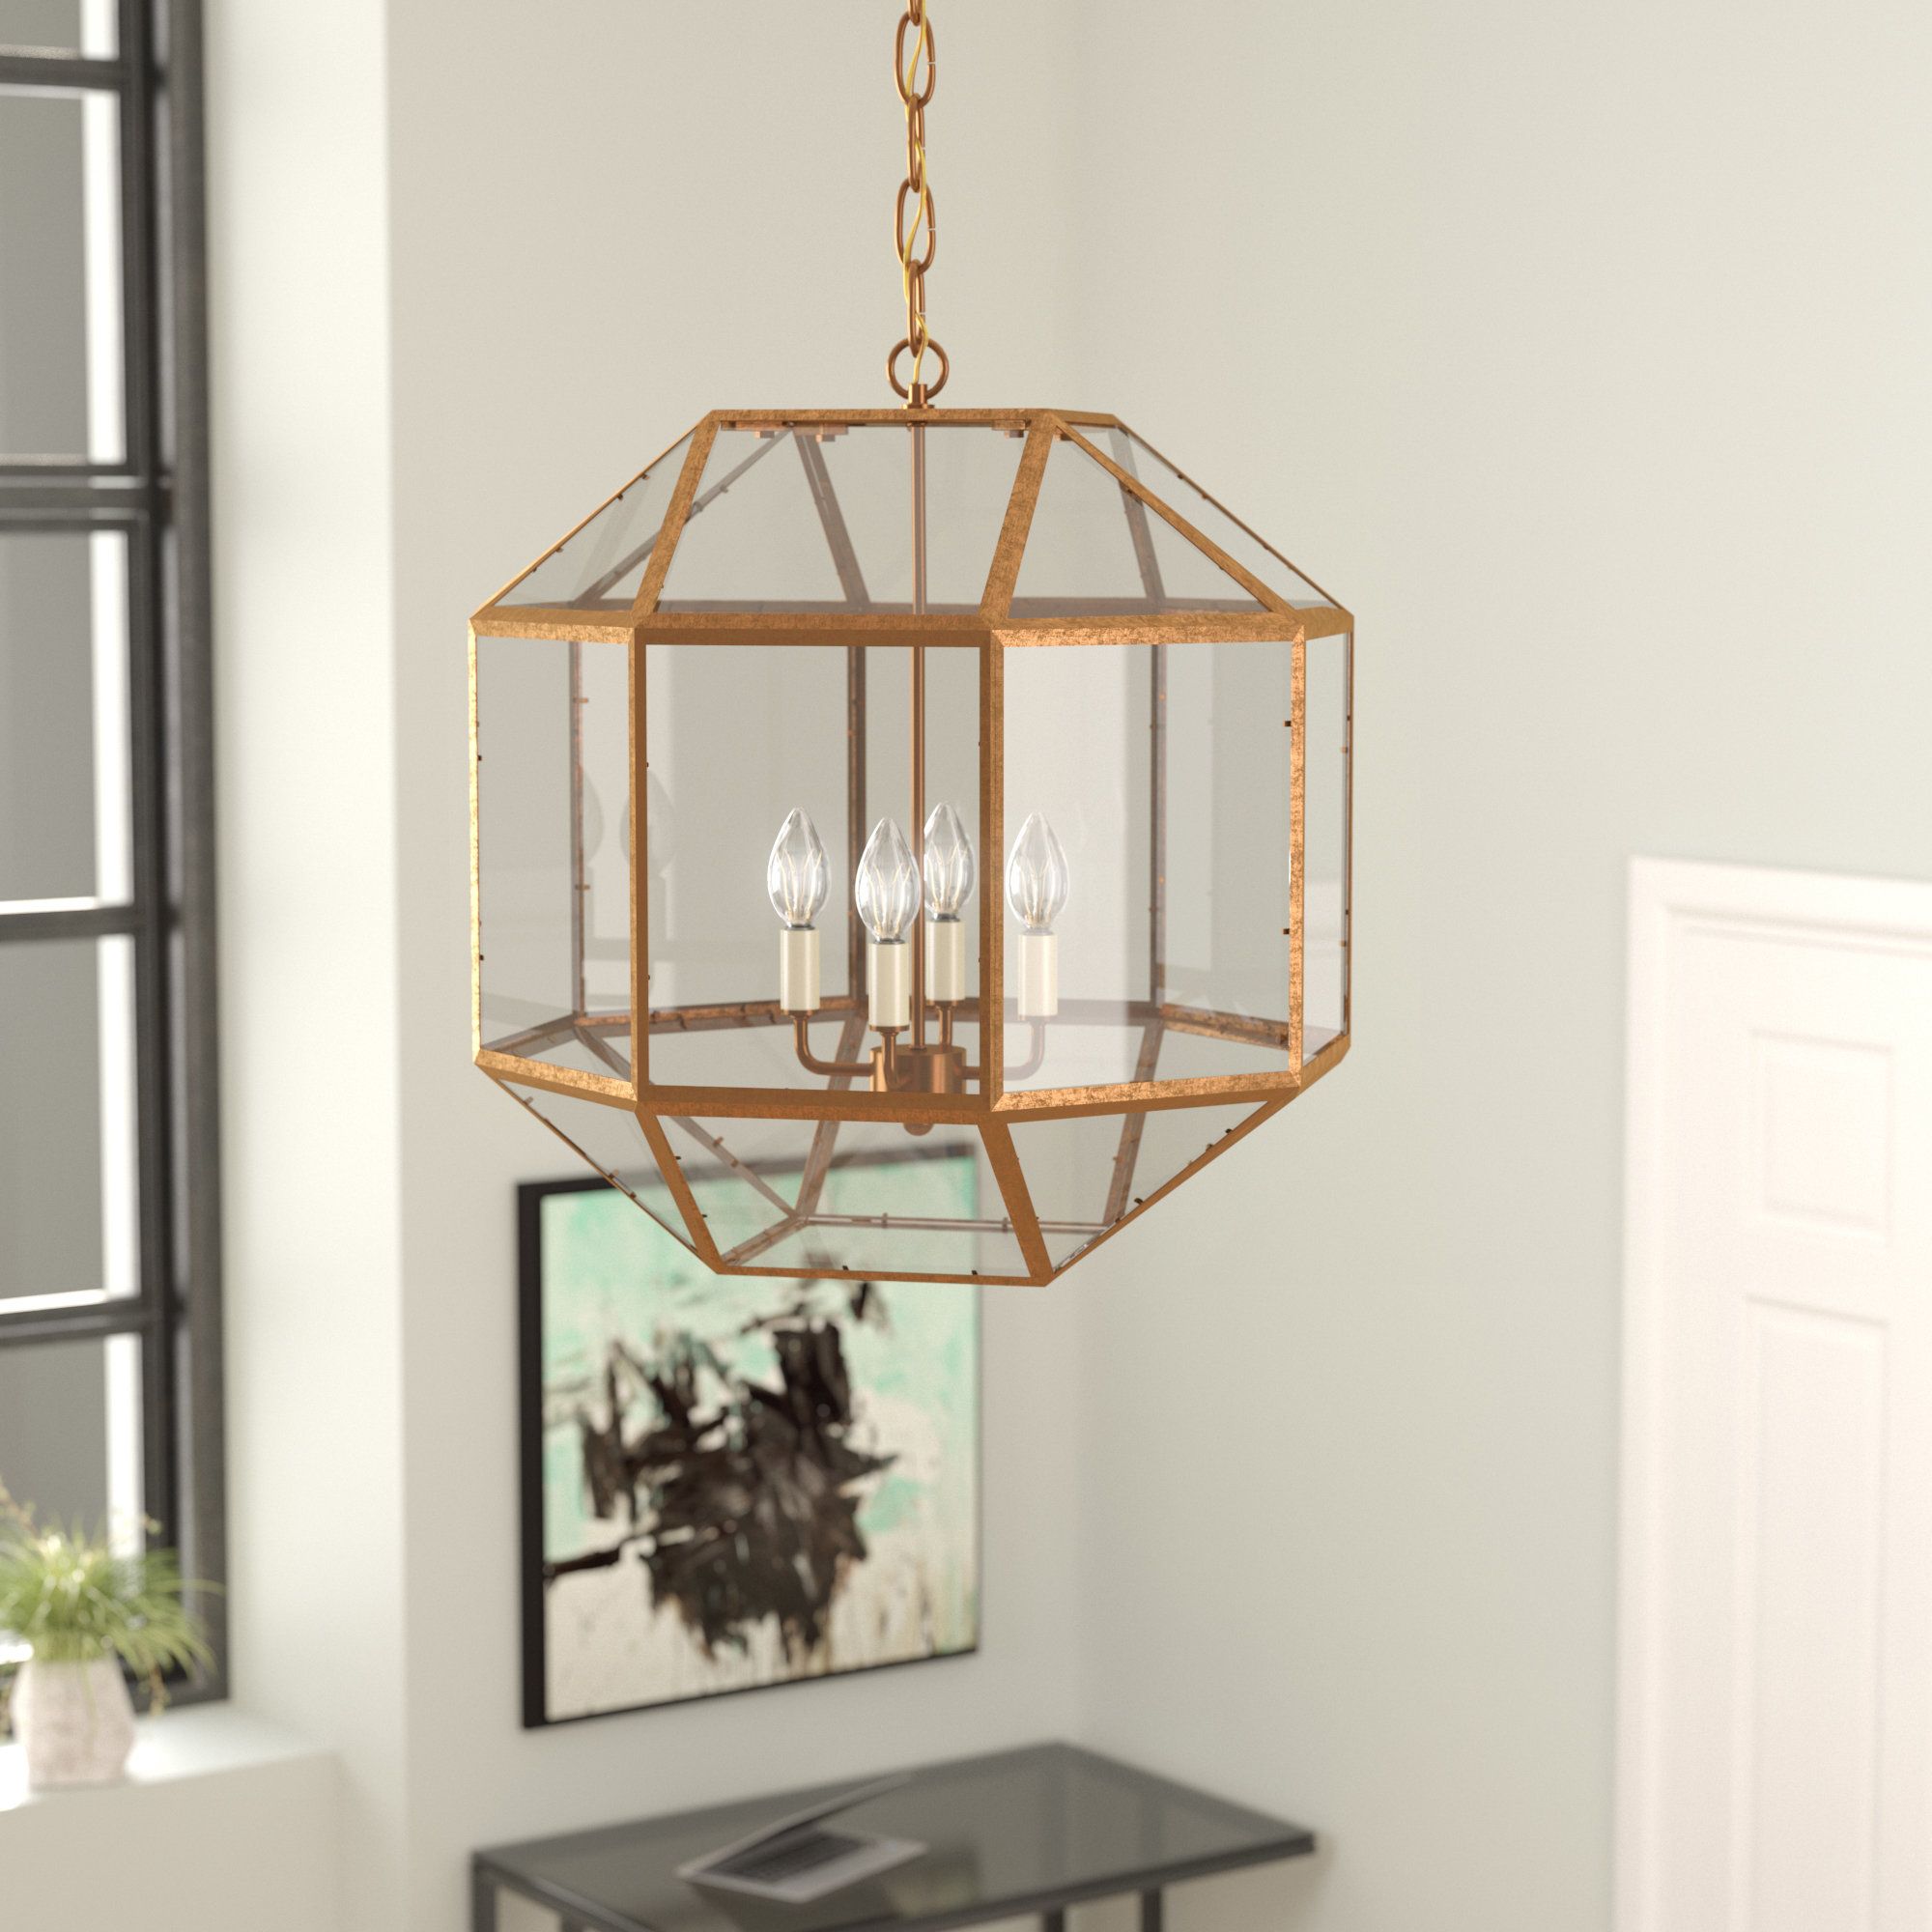 Geometric Chandeliers Sale – Up To 65% Off Until September With Regard To Tabit 5 Light Geometric Chandeliers (View 12 of 30)